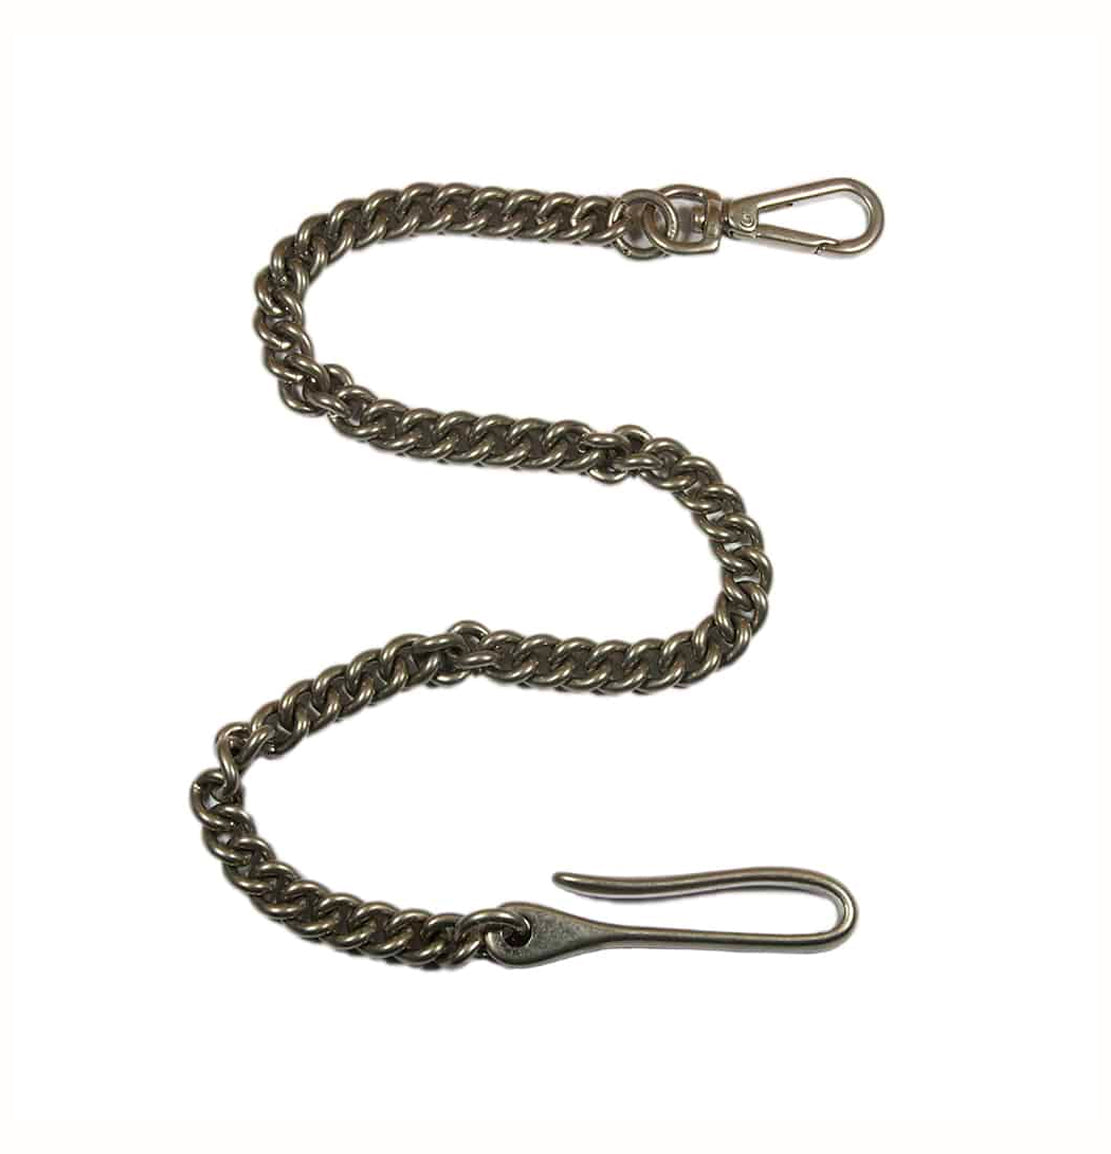 Barnes and moore antique nickel chain